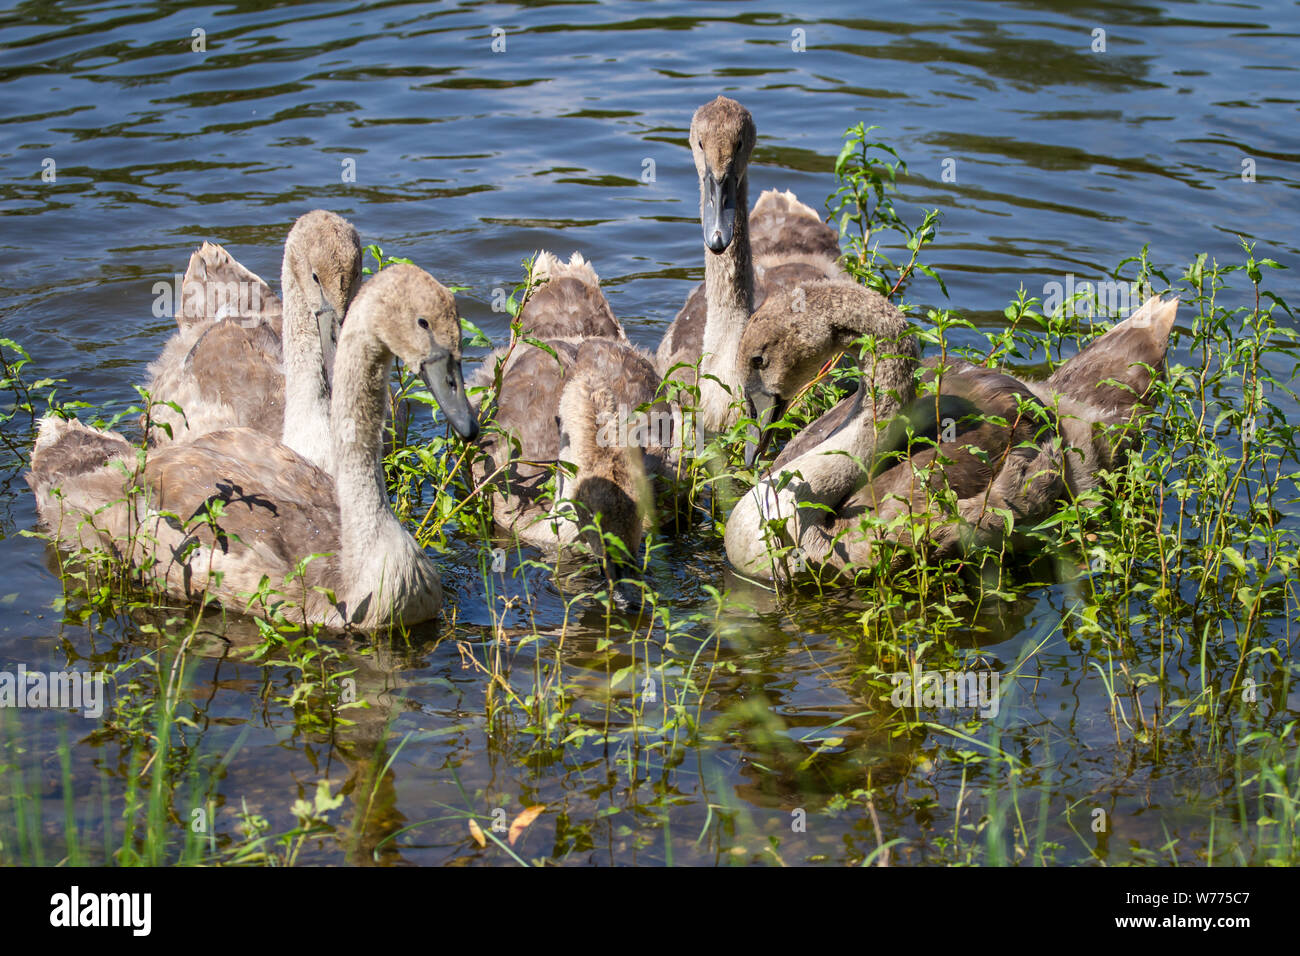 Cygnets, young swans swimming Stock Photo